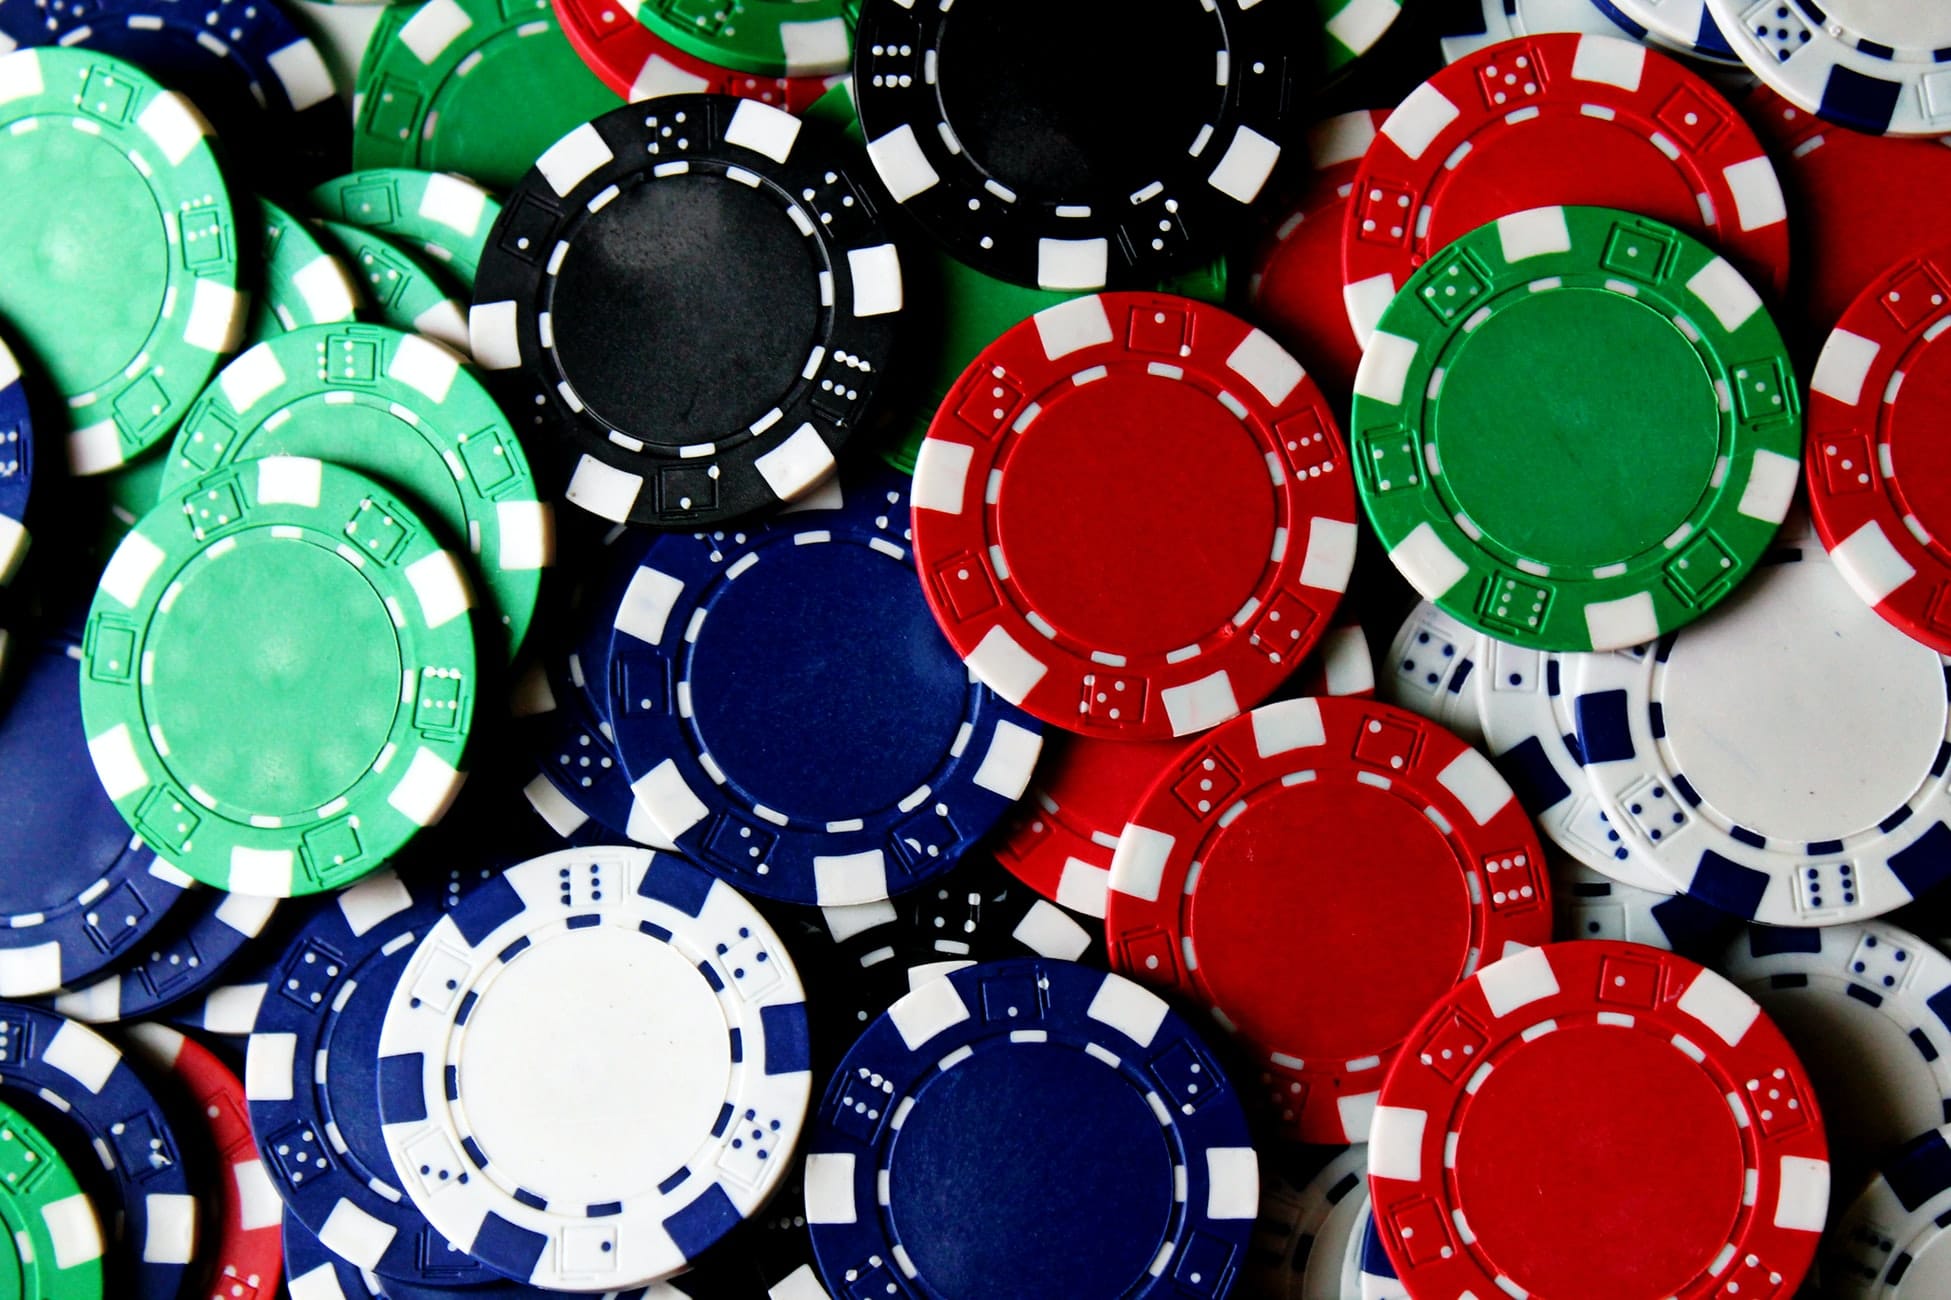 On the 2020 Elections, Texas Hold’em Poker, and Monte Carlo Simulations